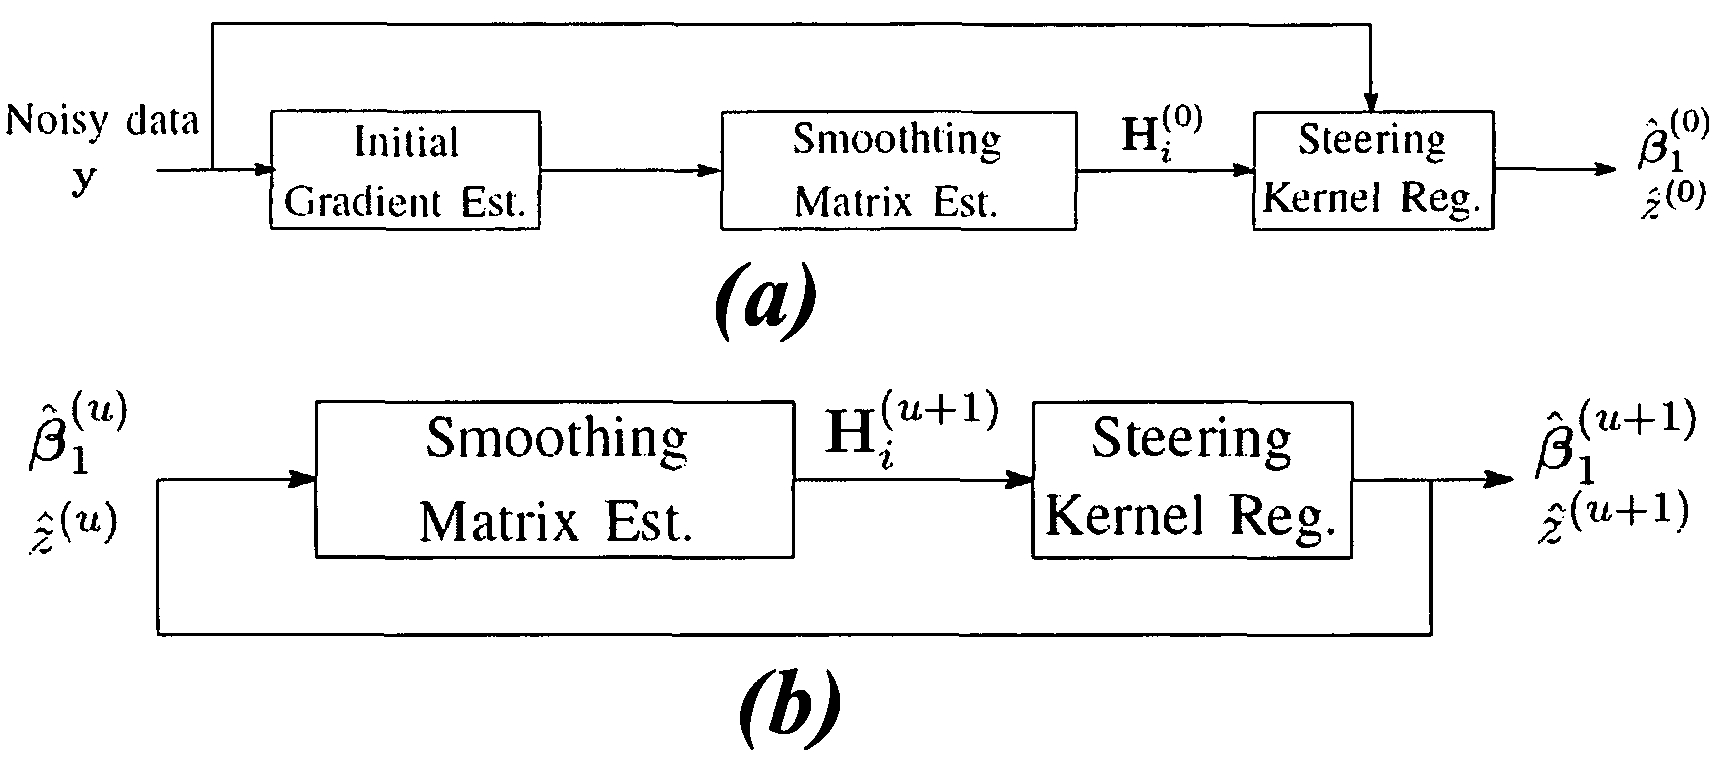 Kernel regression for image processing and reconstruction